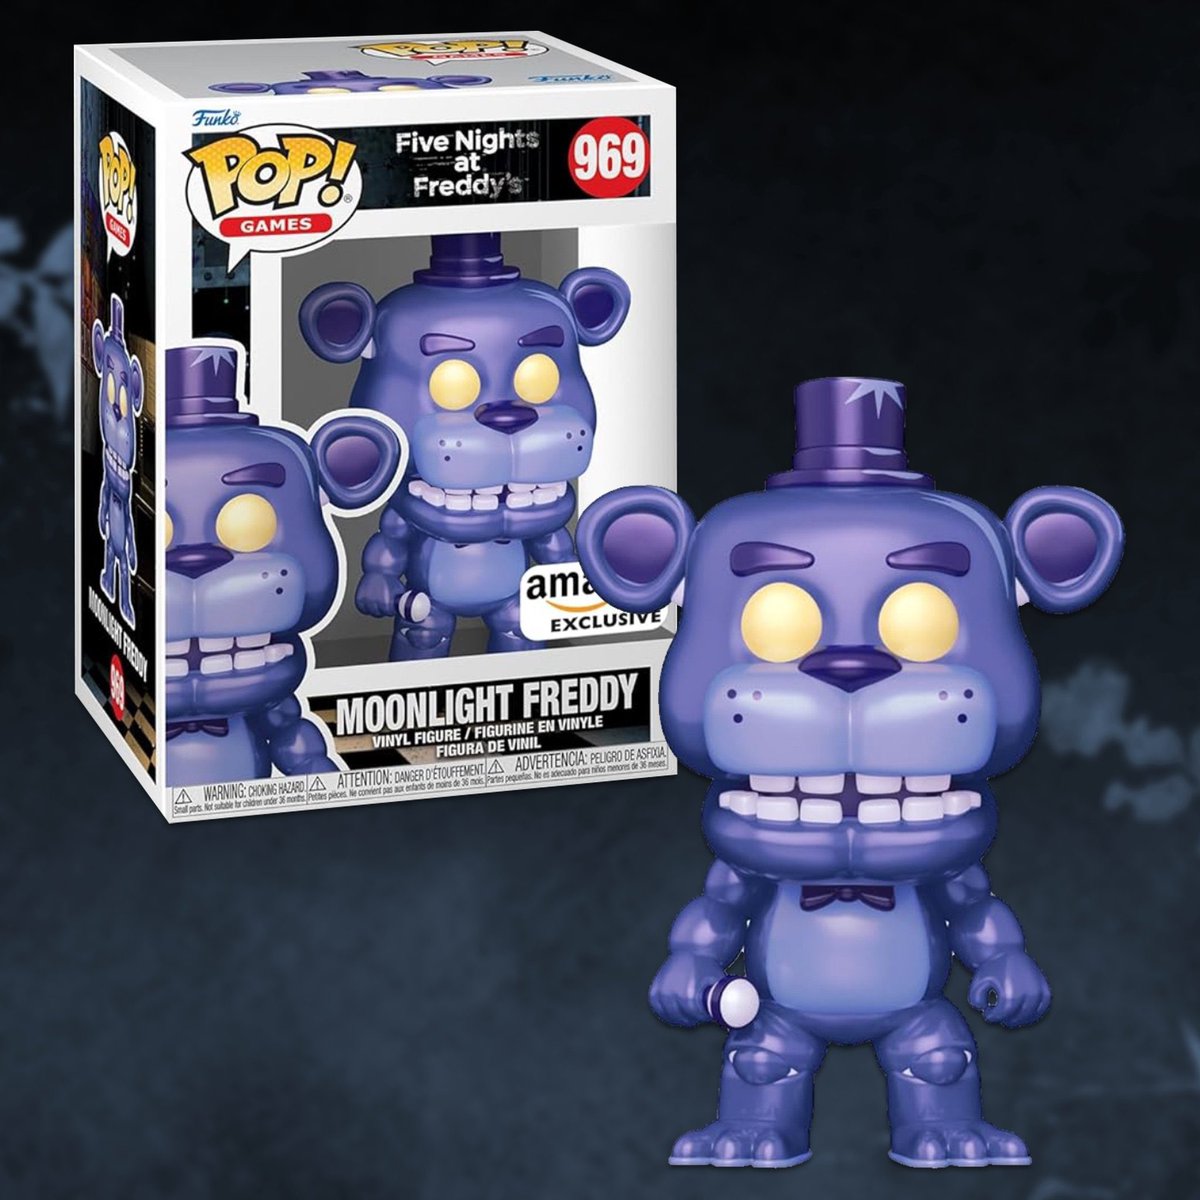 The Amazon Exclusive Moonlight Freddy Fazbear Funko Pop is now properly available for preorder at the link below! amzn.to/4408LzC #Funko #FunkoPop #FiveNightsAtFreddys #FNAF